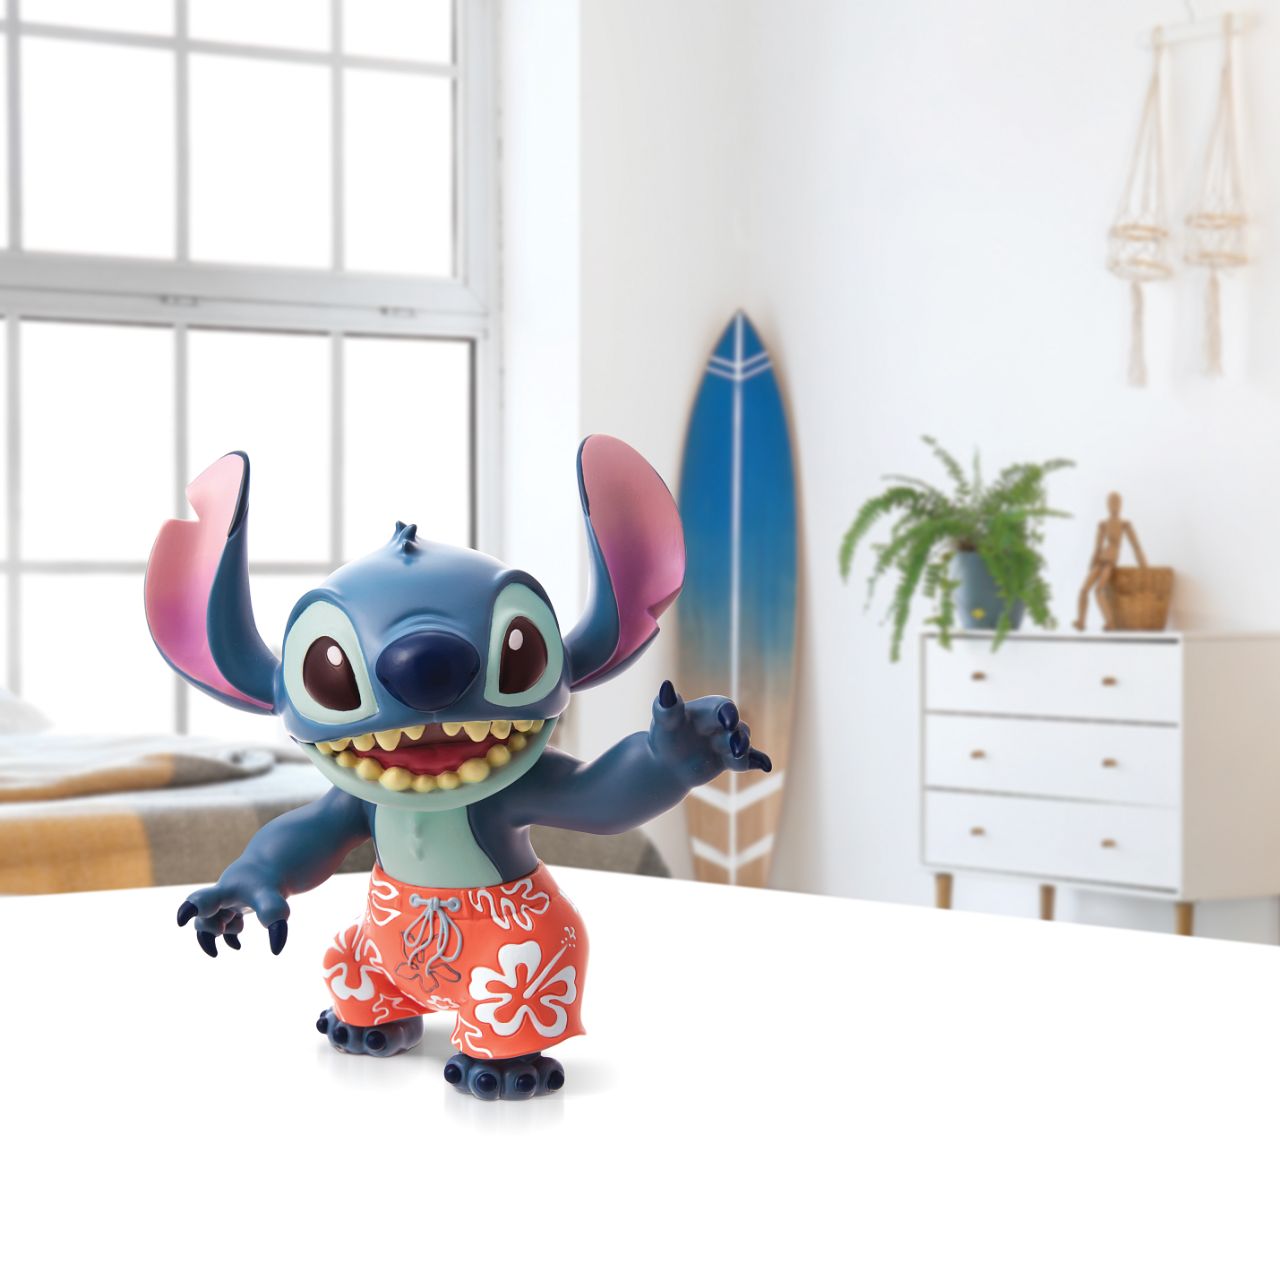 Aloha Stitch Figurine  Stitch, the troublesome alien from Disney's "Lilo and Stitch" strikes an fun pose in this handcrafted design, sculpted from cast stone with highly detailed shorts. Unique variations should be expected as this product is hand painted.